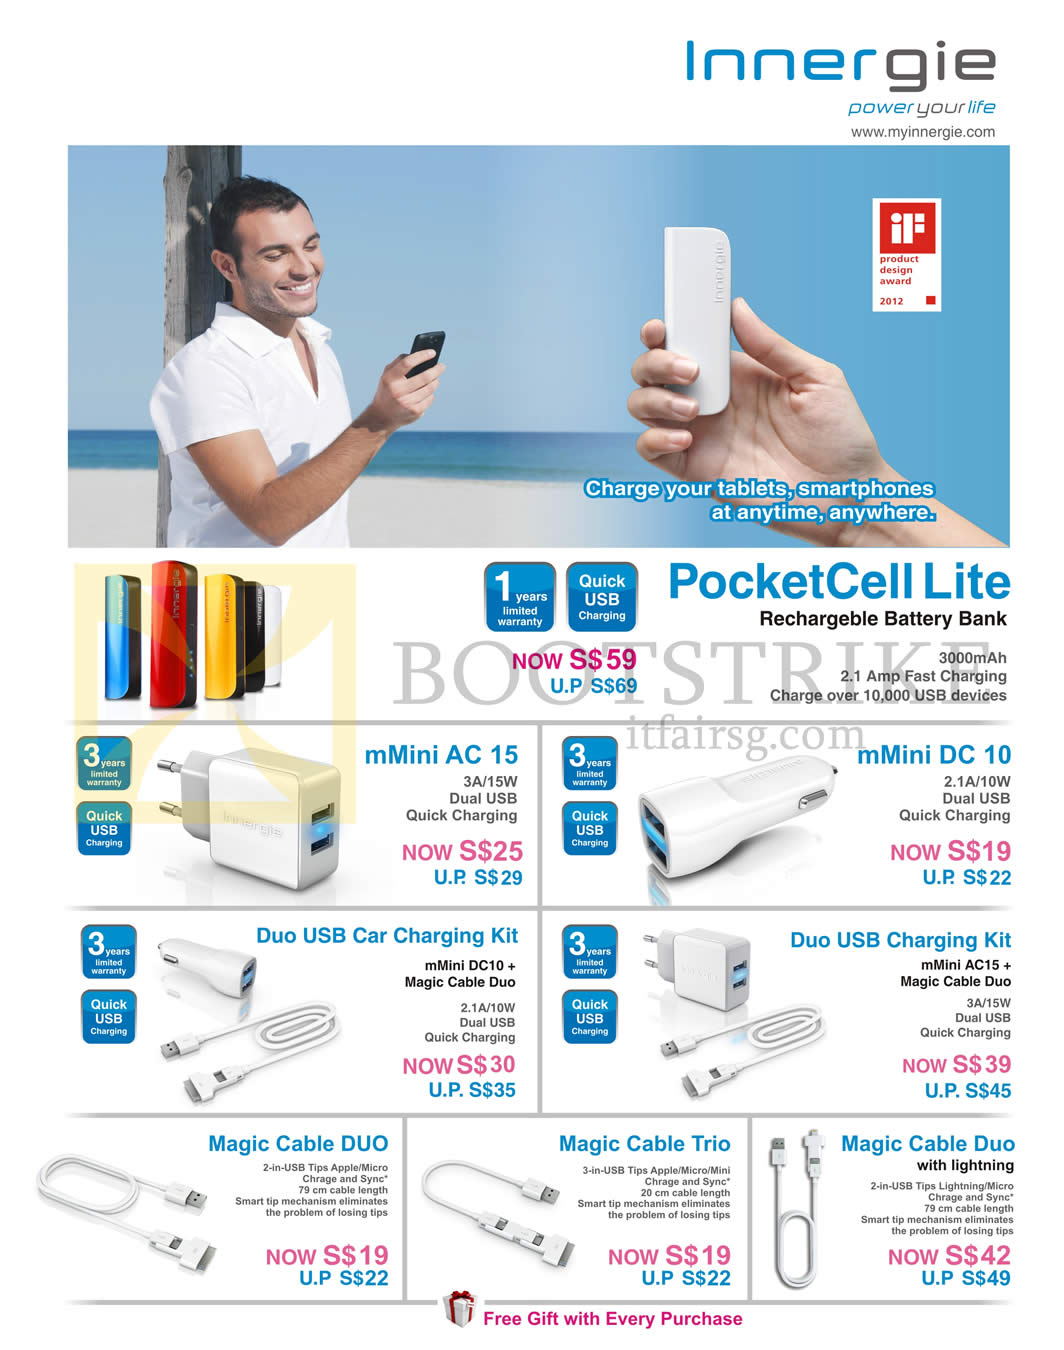 IT SHOW 2014 price list image brochure of EpiCentre Innergie Power Banks Pocketcell Lite, MMini AC, DC, Car Charging Kit, Magic Cable, Lightning